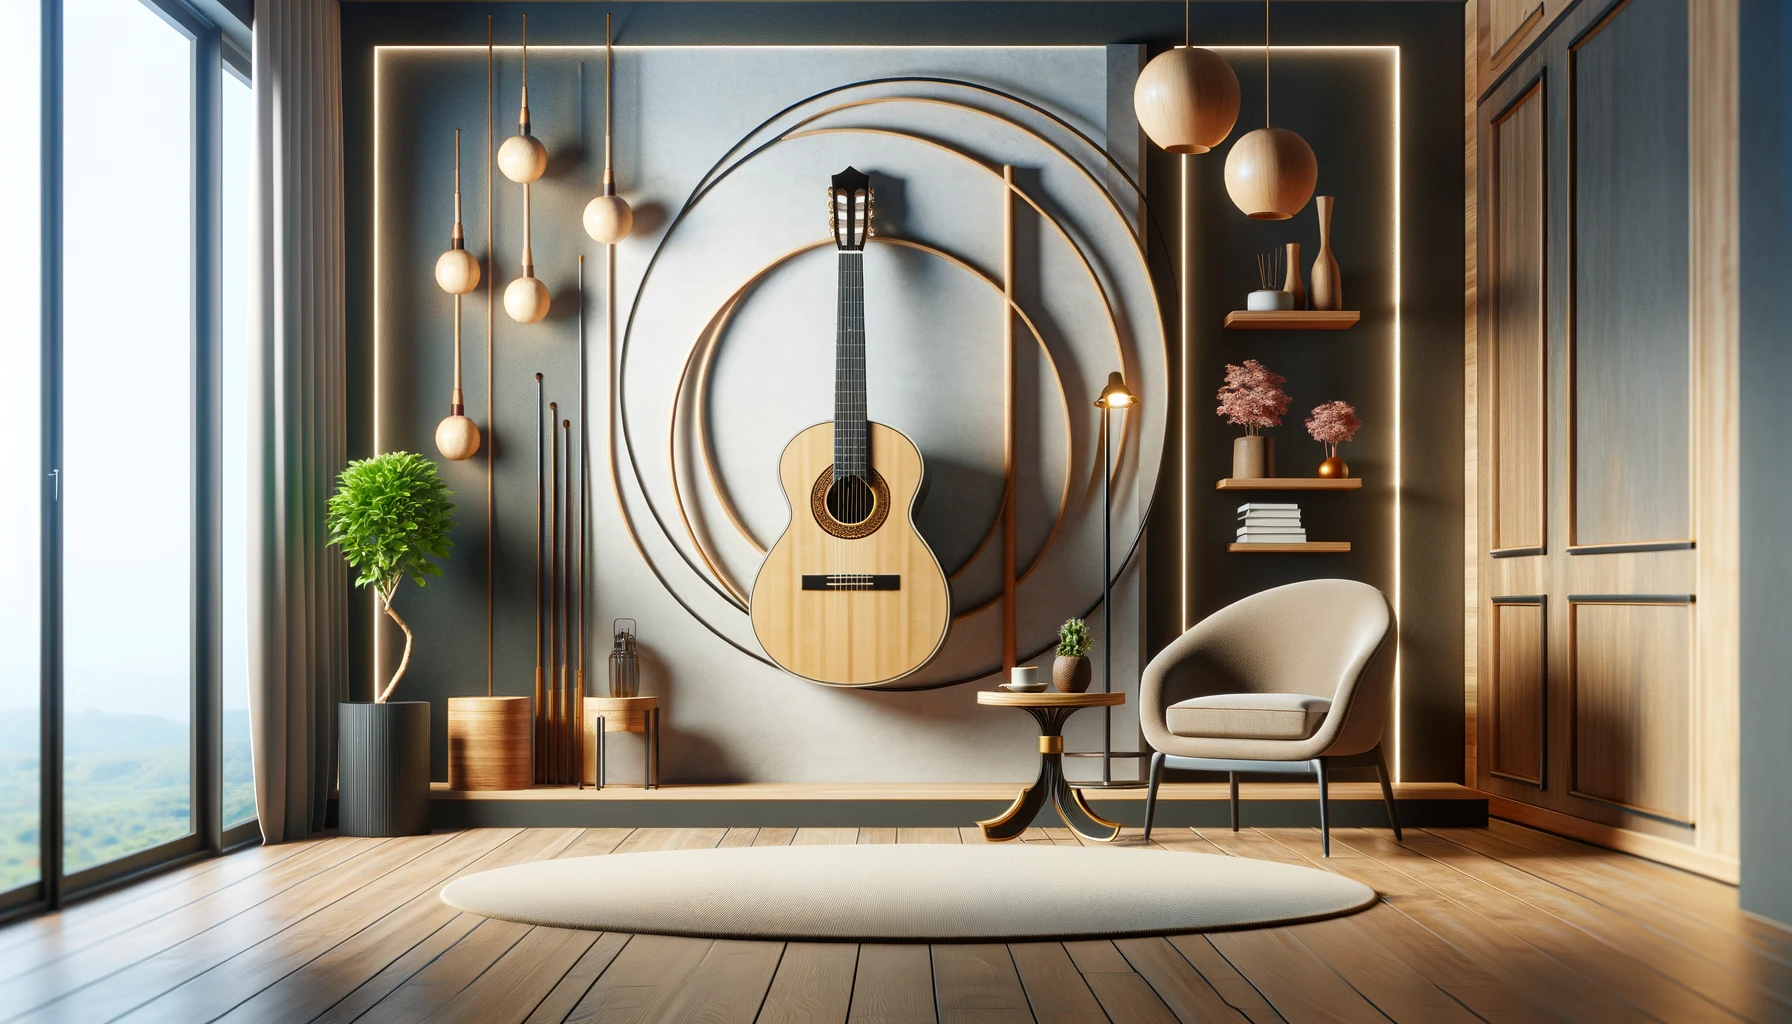 A guitar on a wall in a well designed room